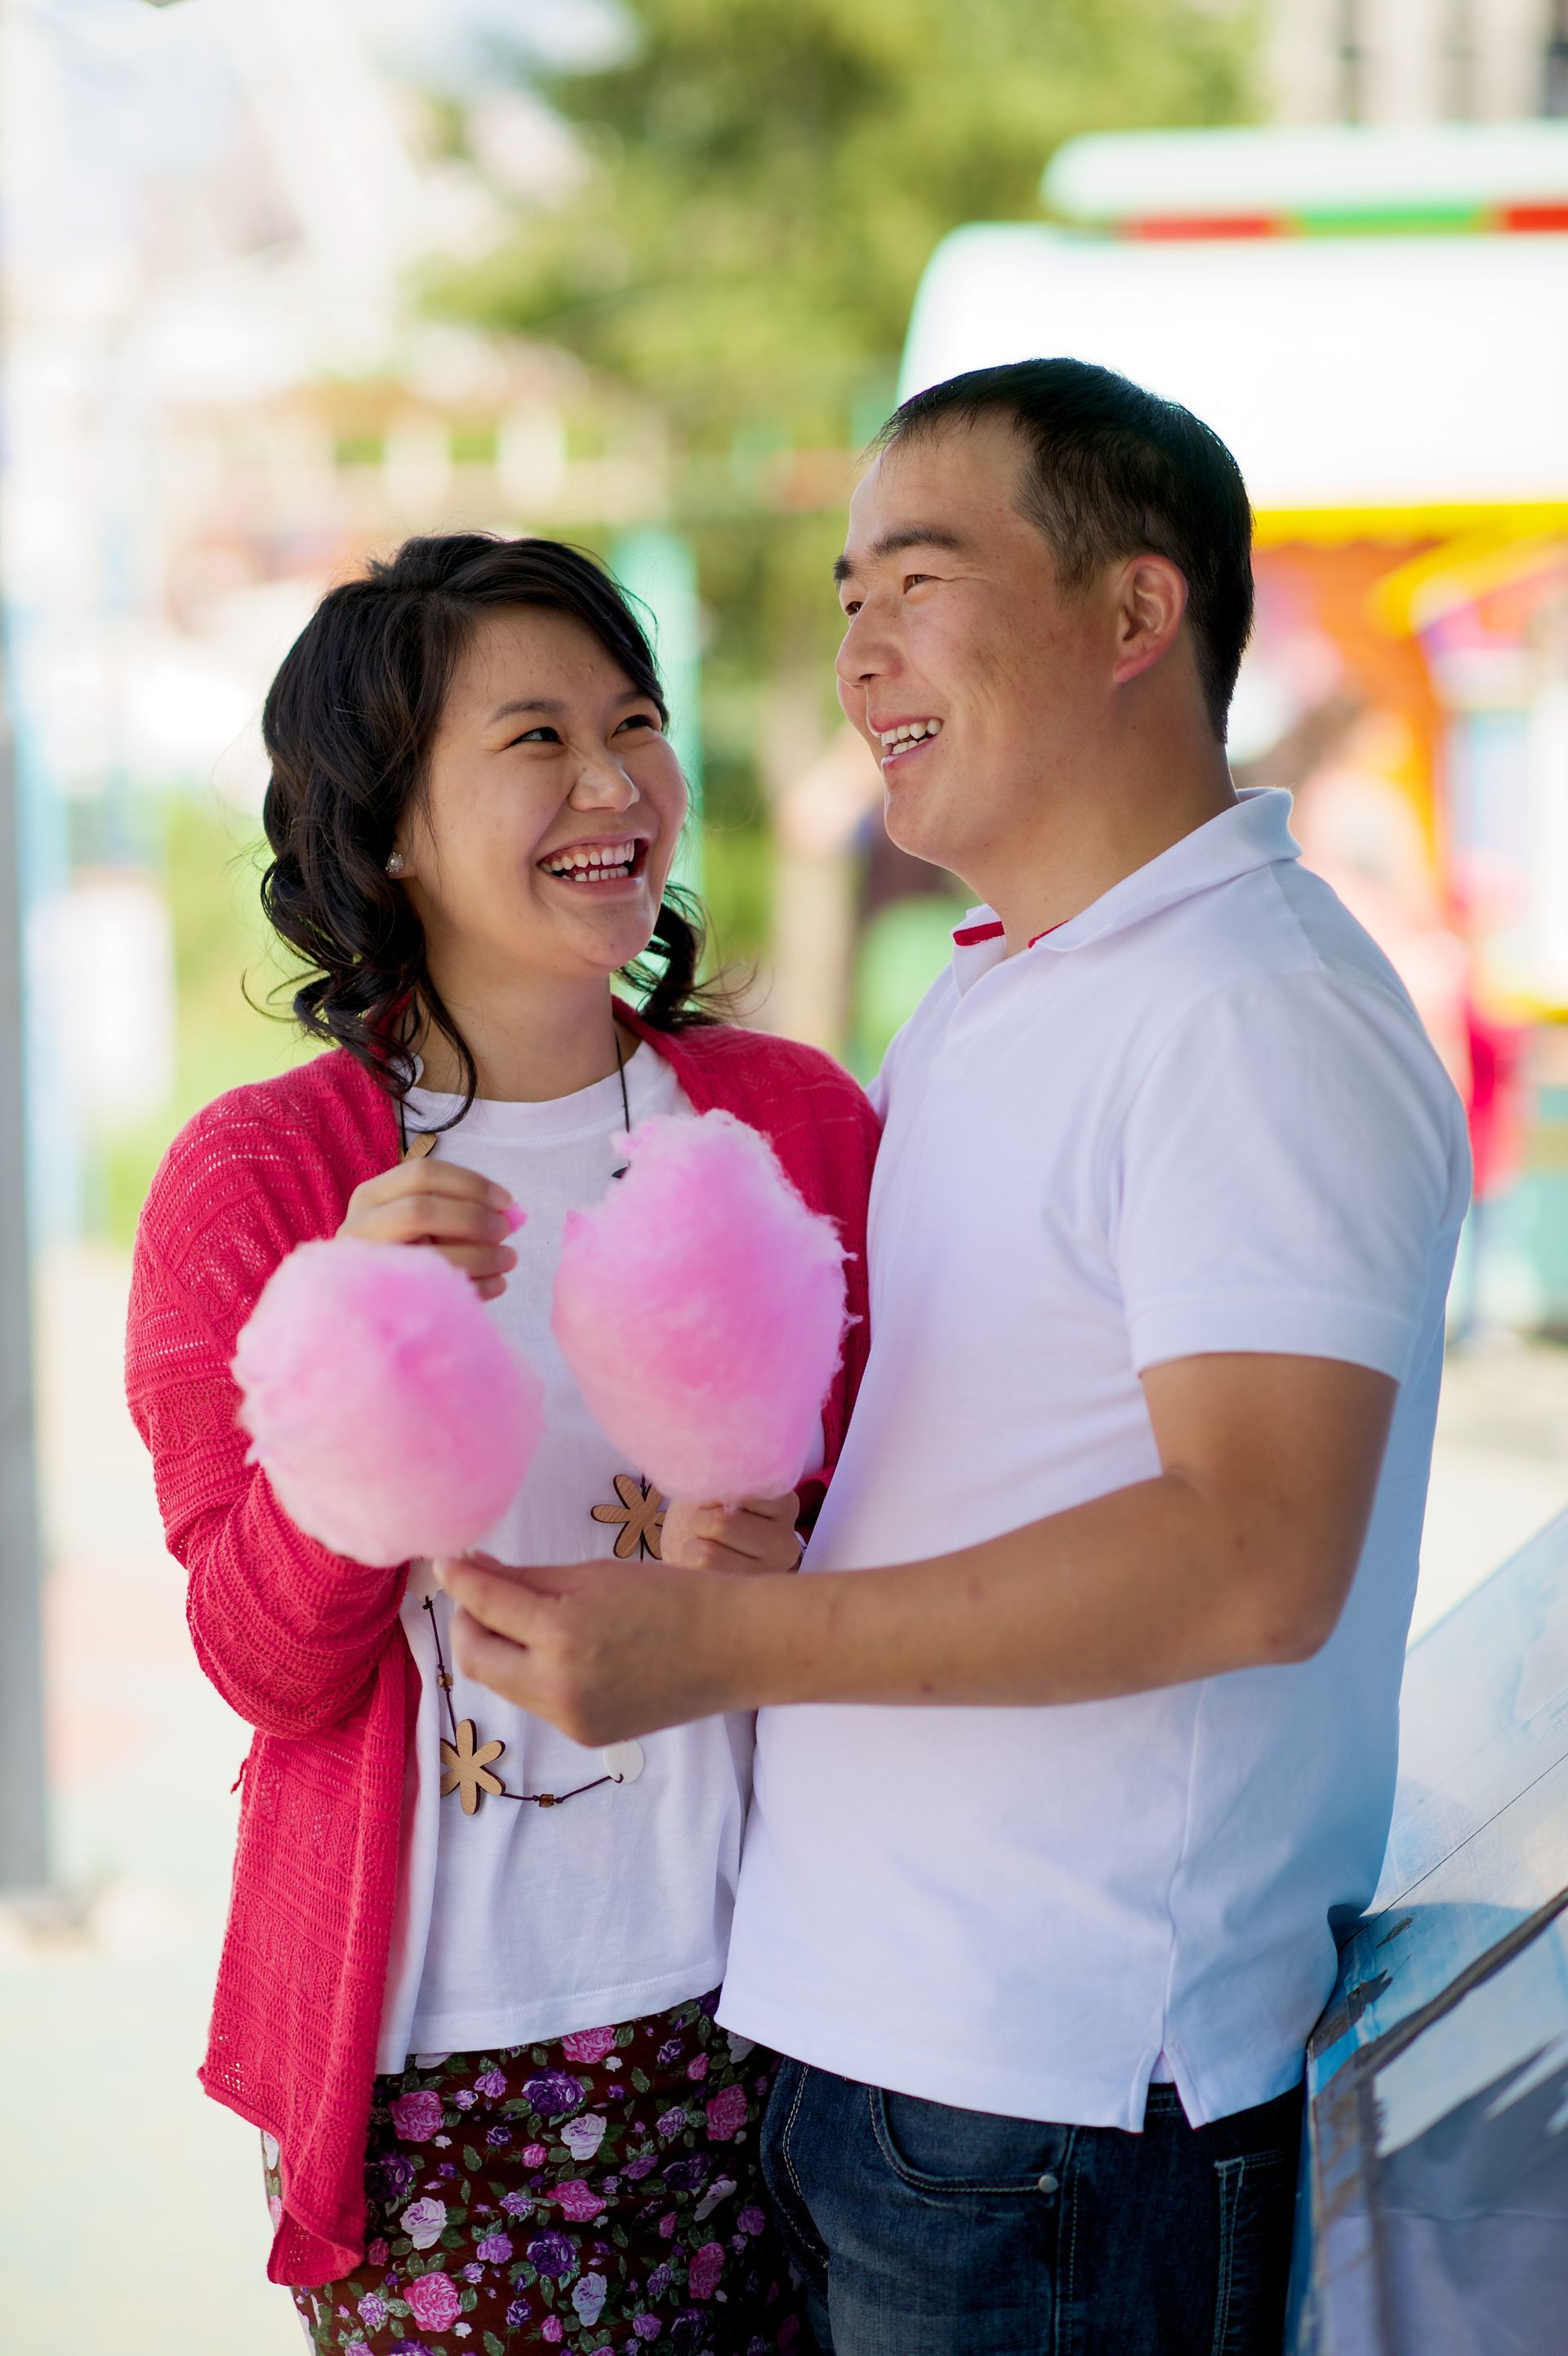 A couple at a carnival, holding cotton candy.